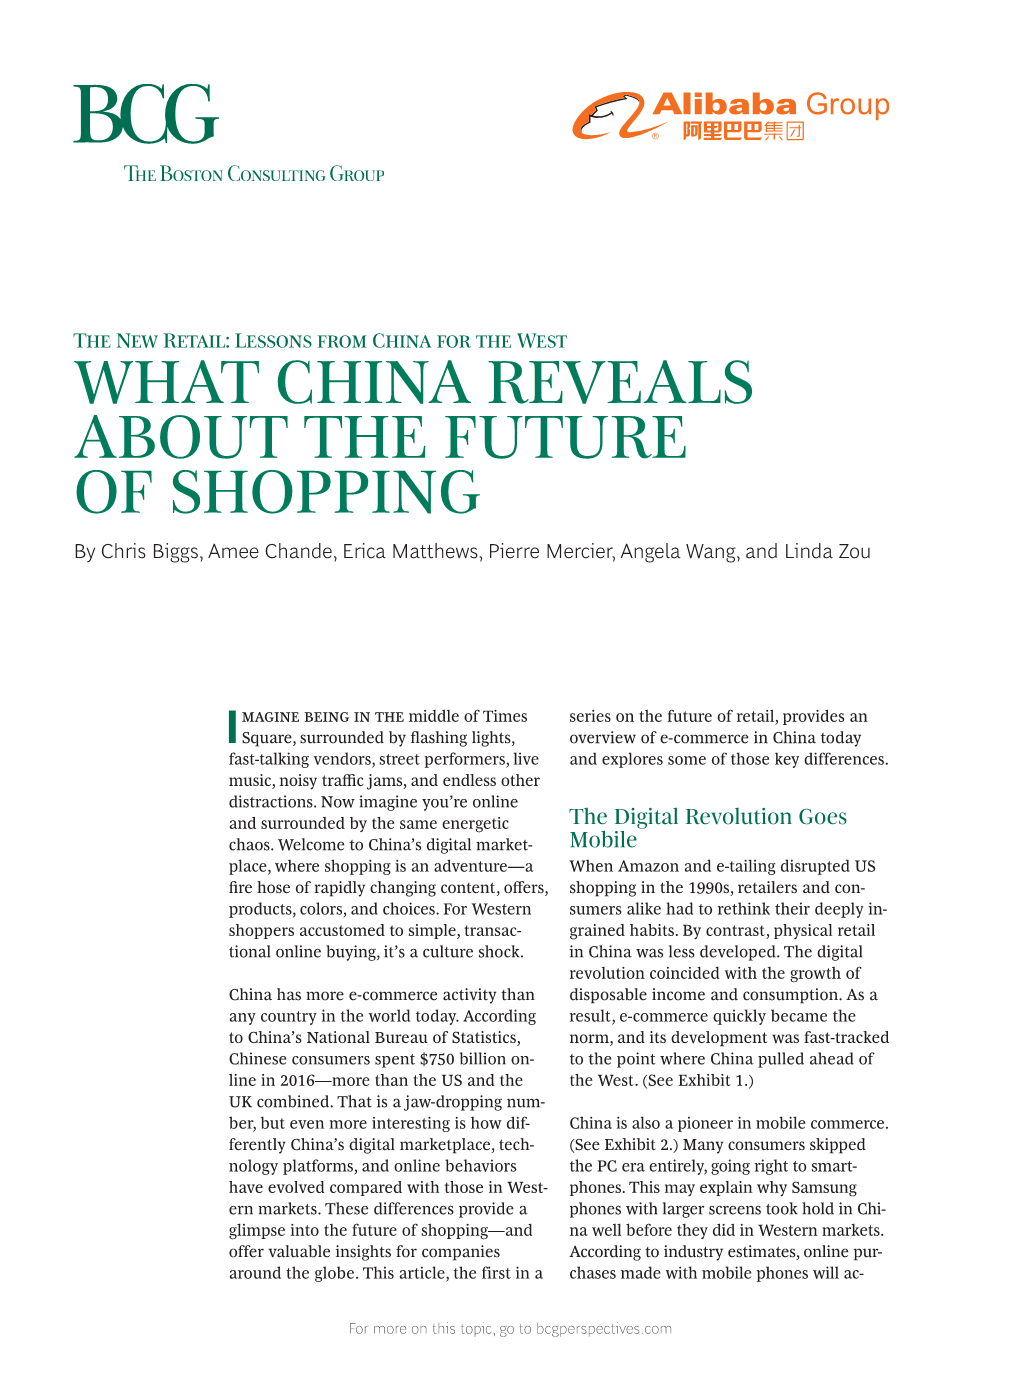 What China Reveals About the Future of Shopping by Chris Biggs, Amee Chande, Erica Matthews, Pierre Mercier, Angela Wang, and Linda Zou